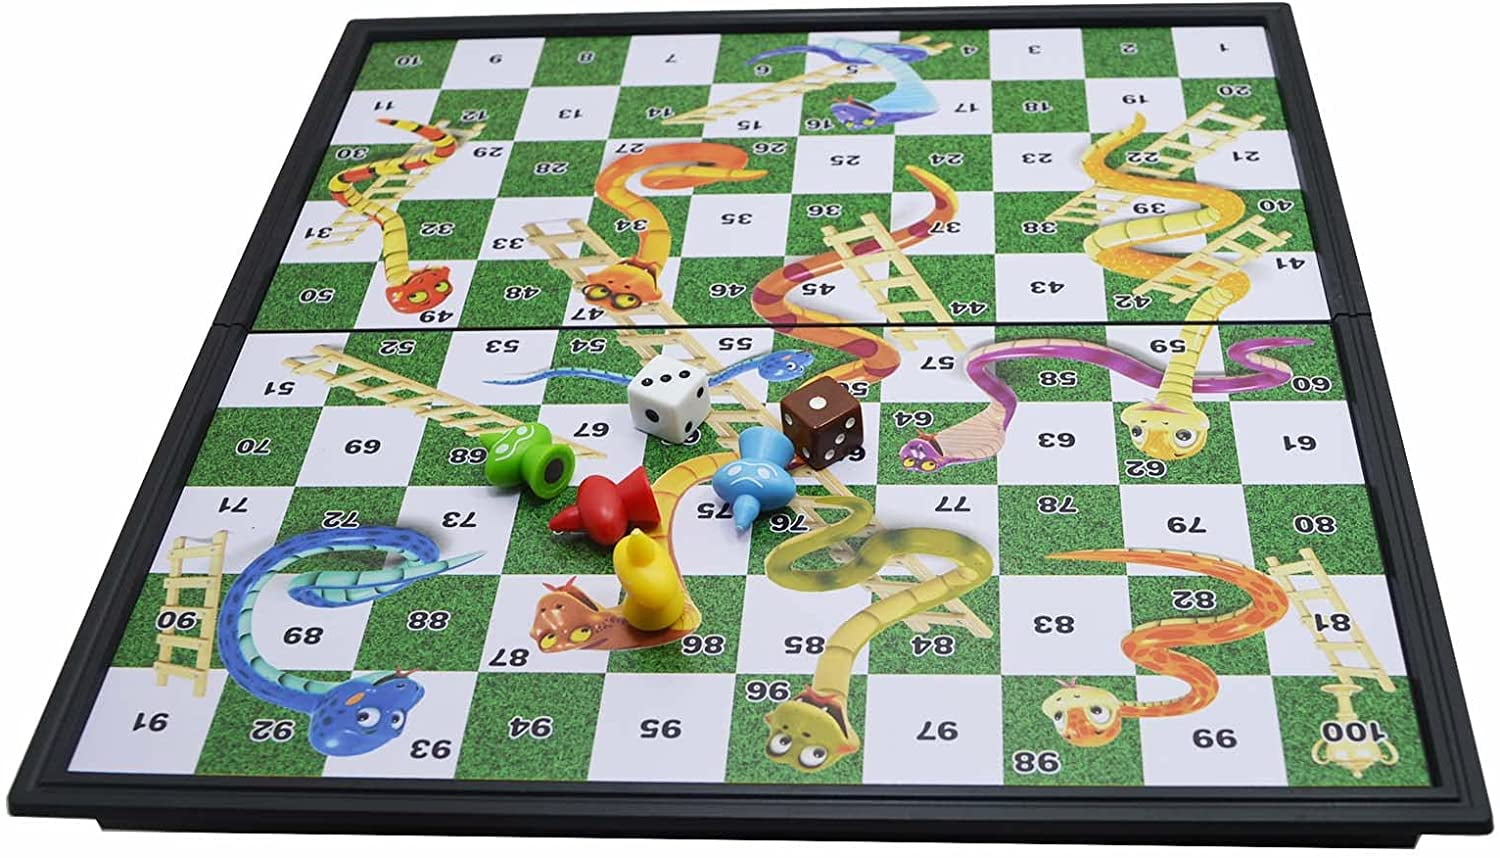 Snakes & Ladders Game 10x10 Board 100 Squares, Extendable Board 10x10 ...